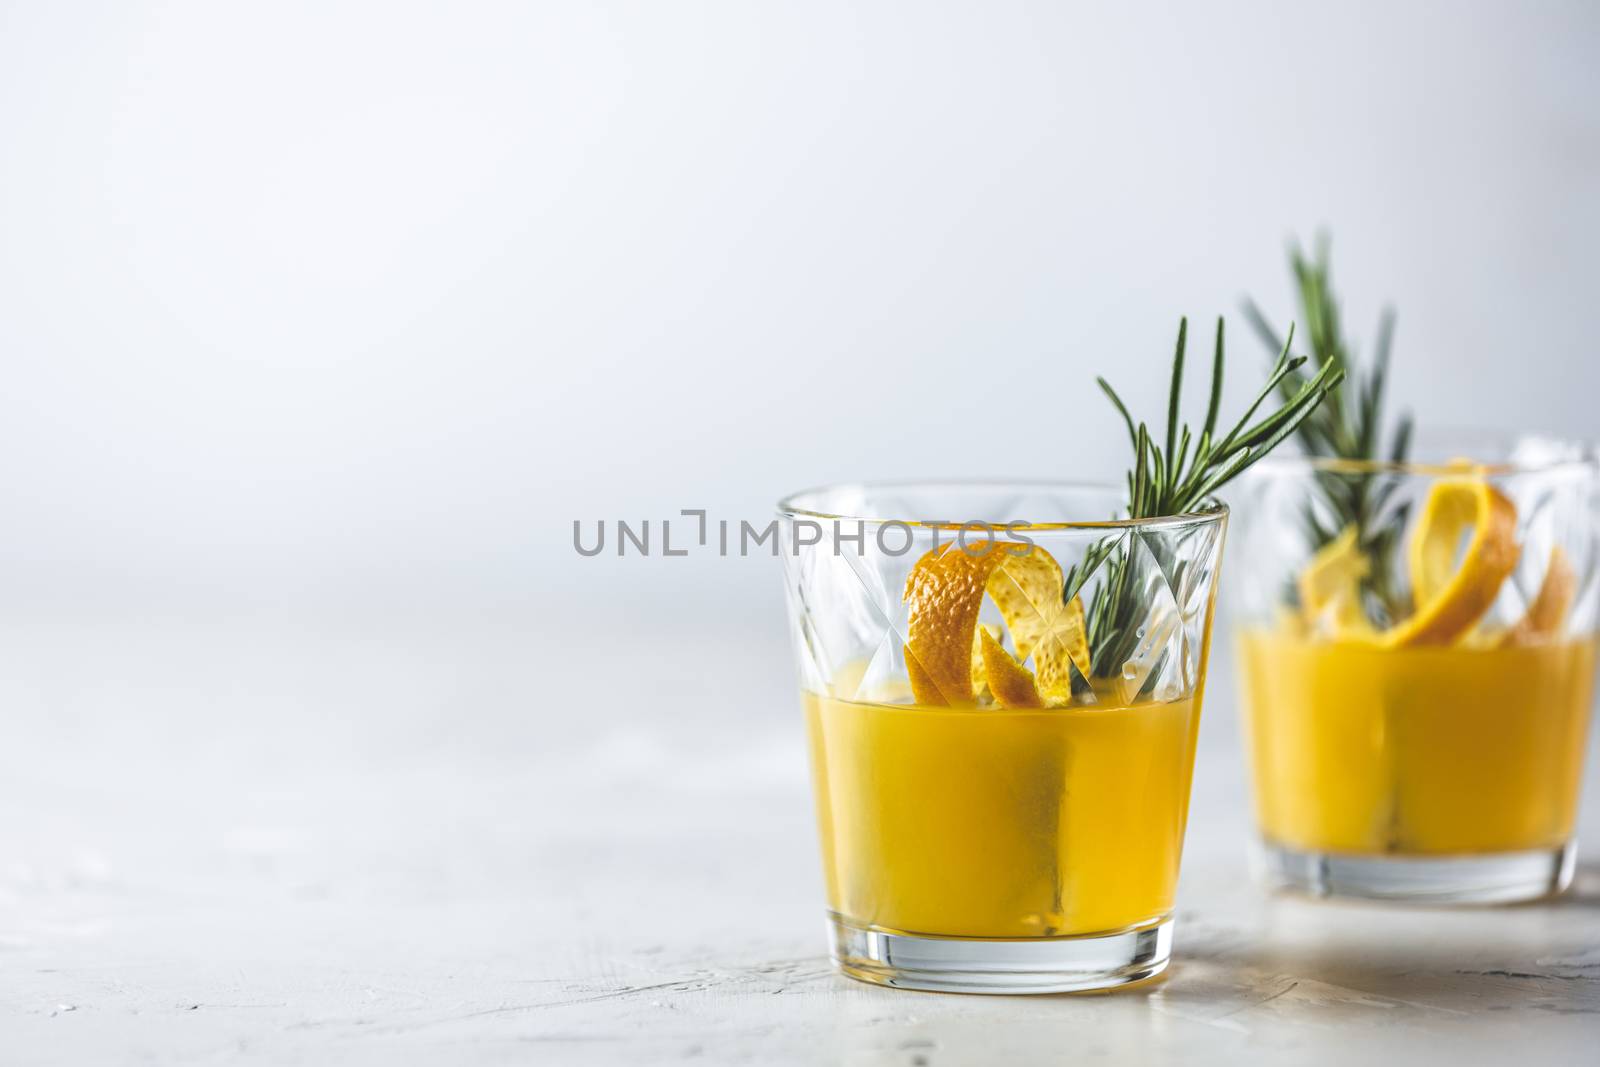 Two glasses of honey bourbon cocktail with rosemary simple syrup or homemade whiskey sour cocktail drink with orange and rosemary decoration orange peel, jar of honey and bartender tools